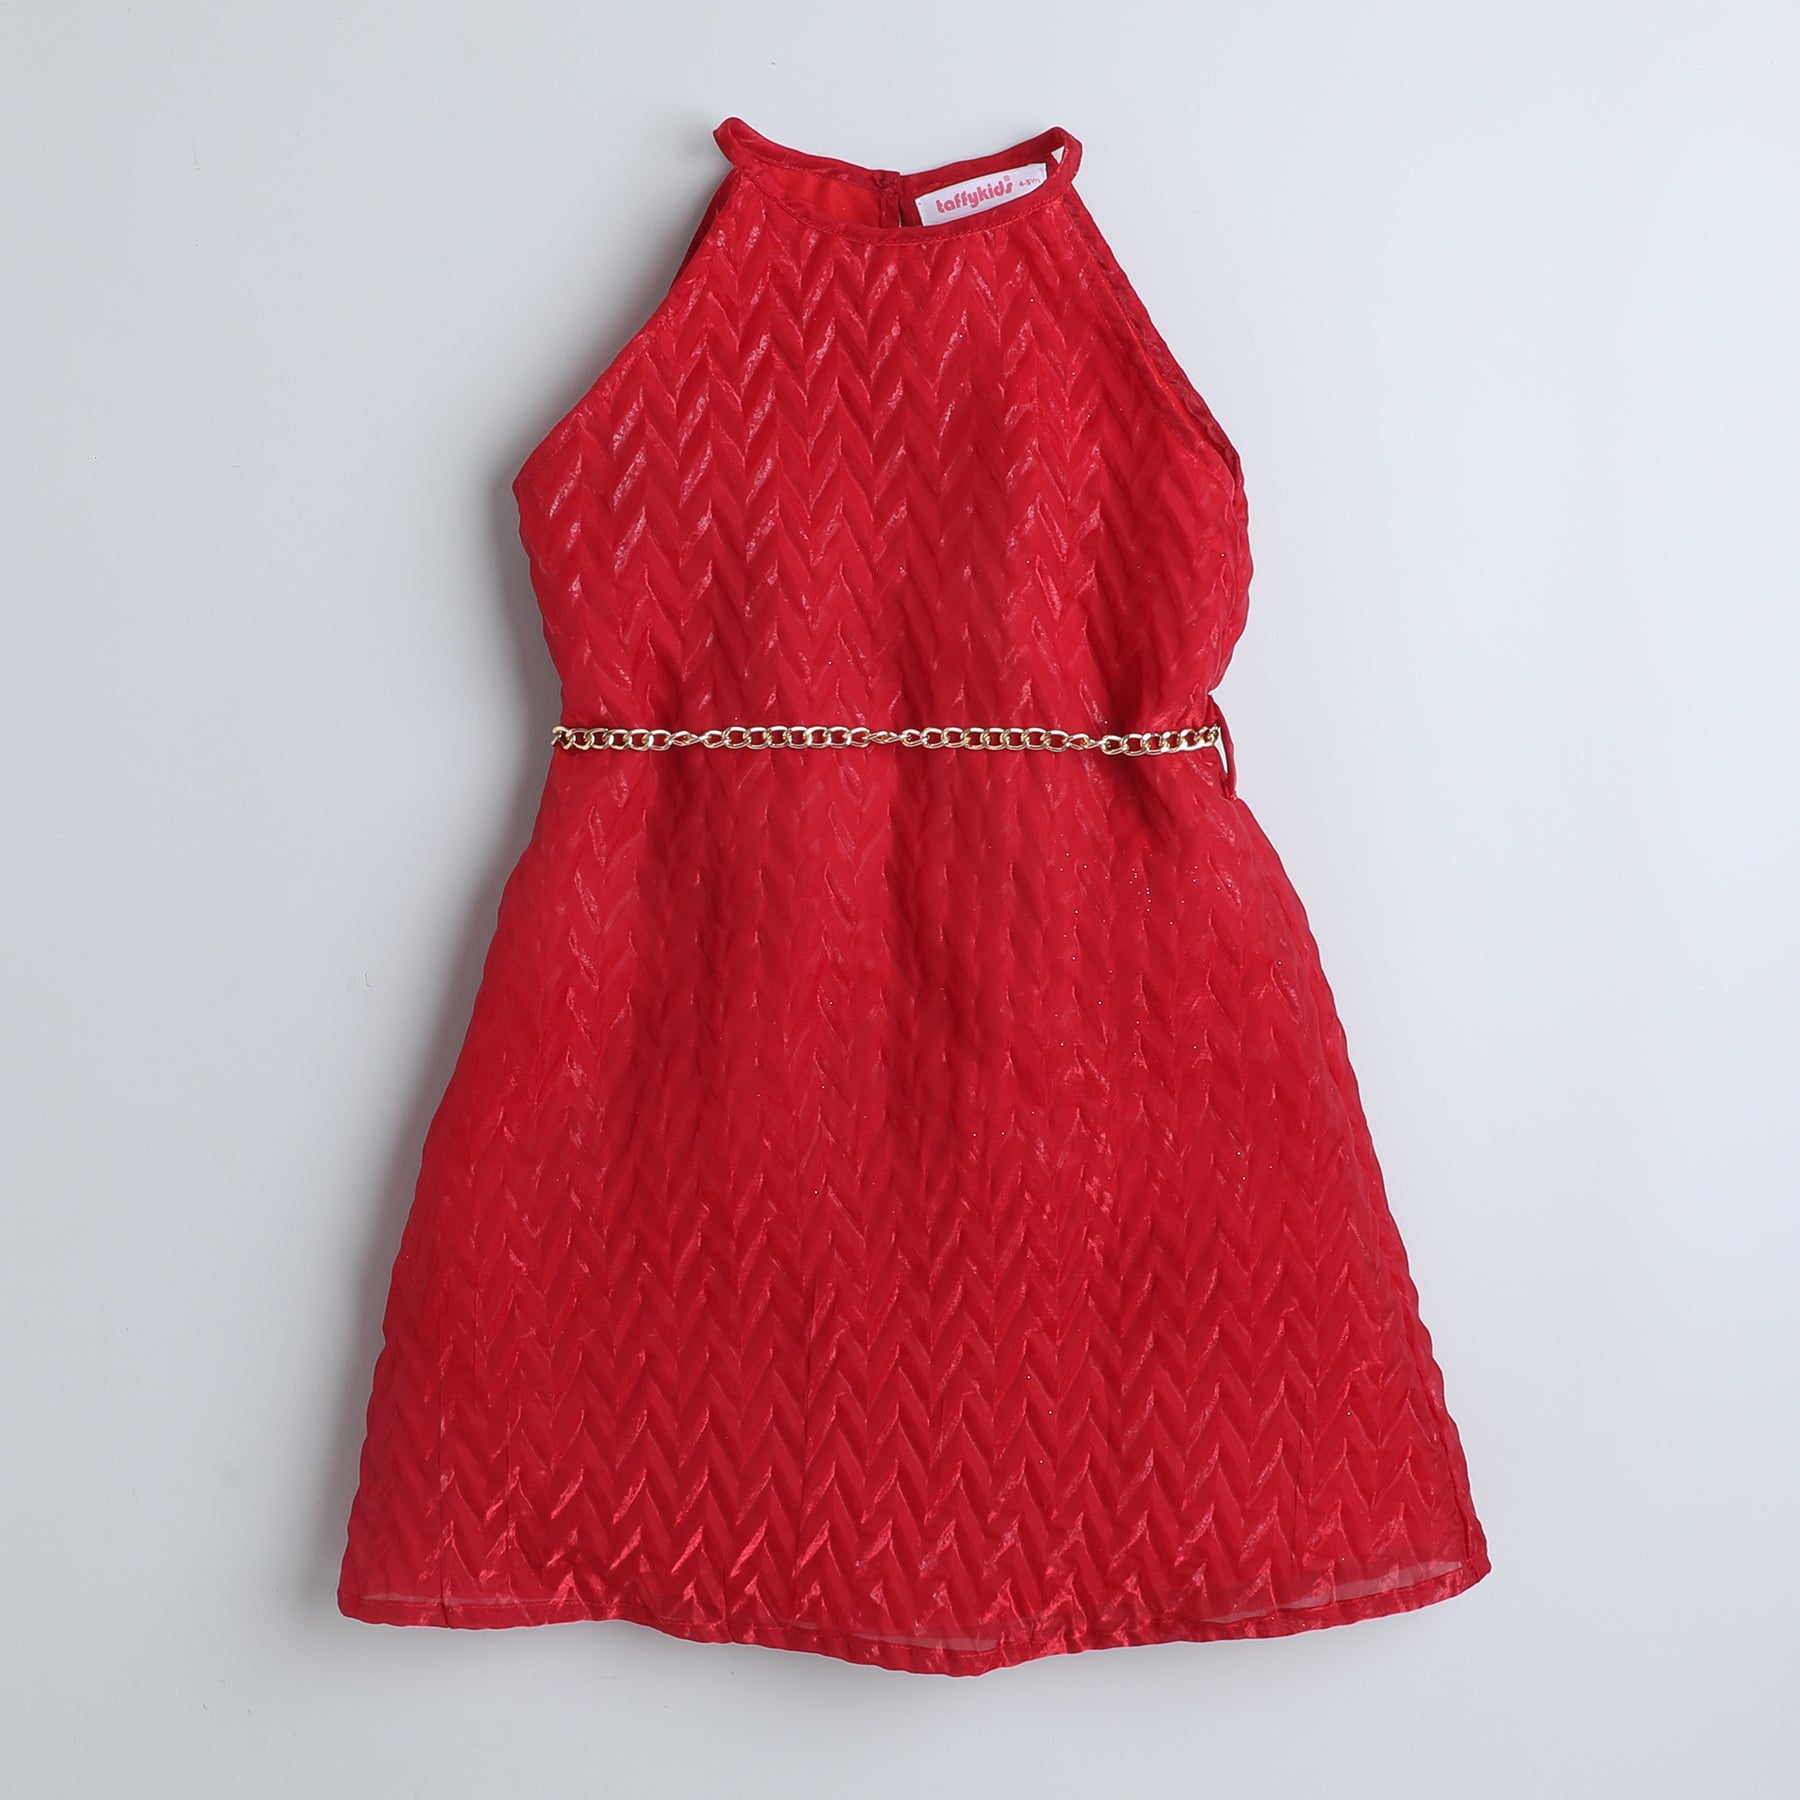 Taffykids Organza pleated Halter neck A-line party Dress with Chain belt-Red